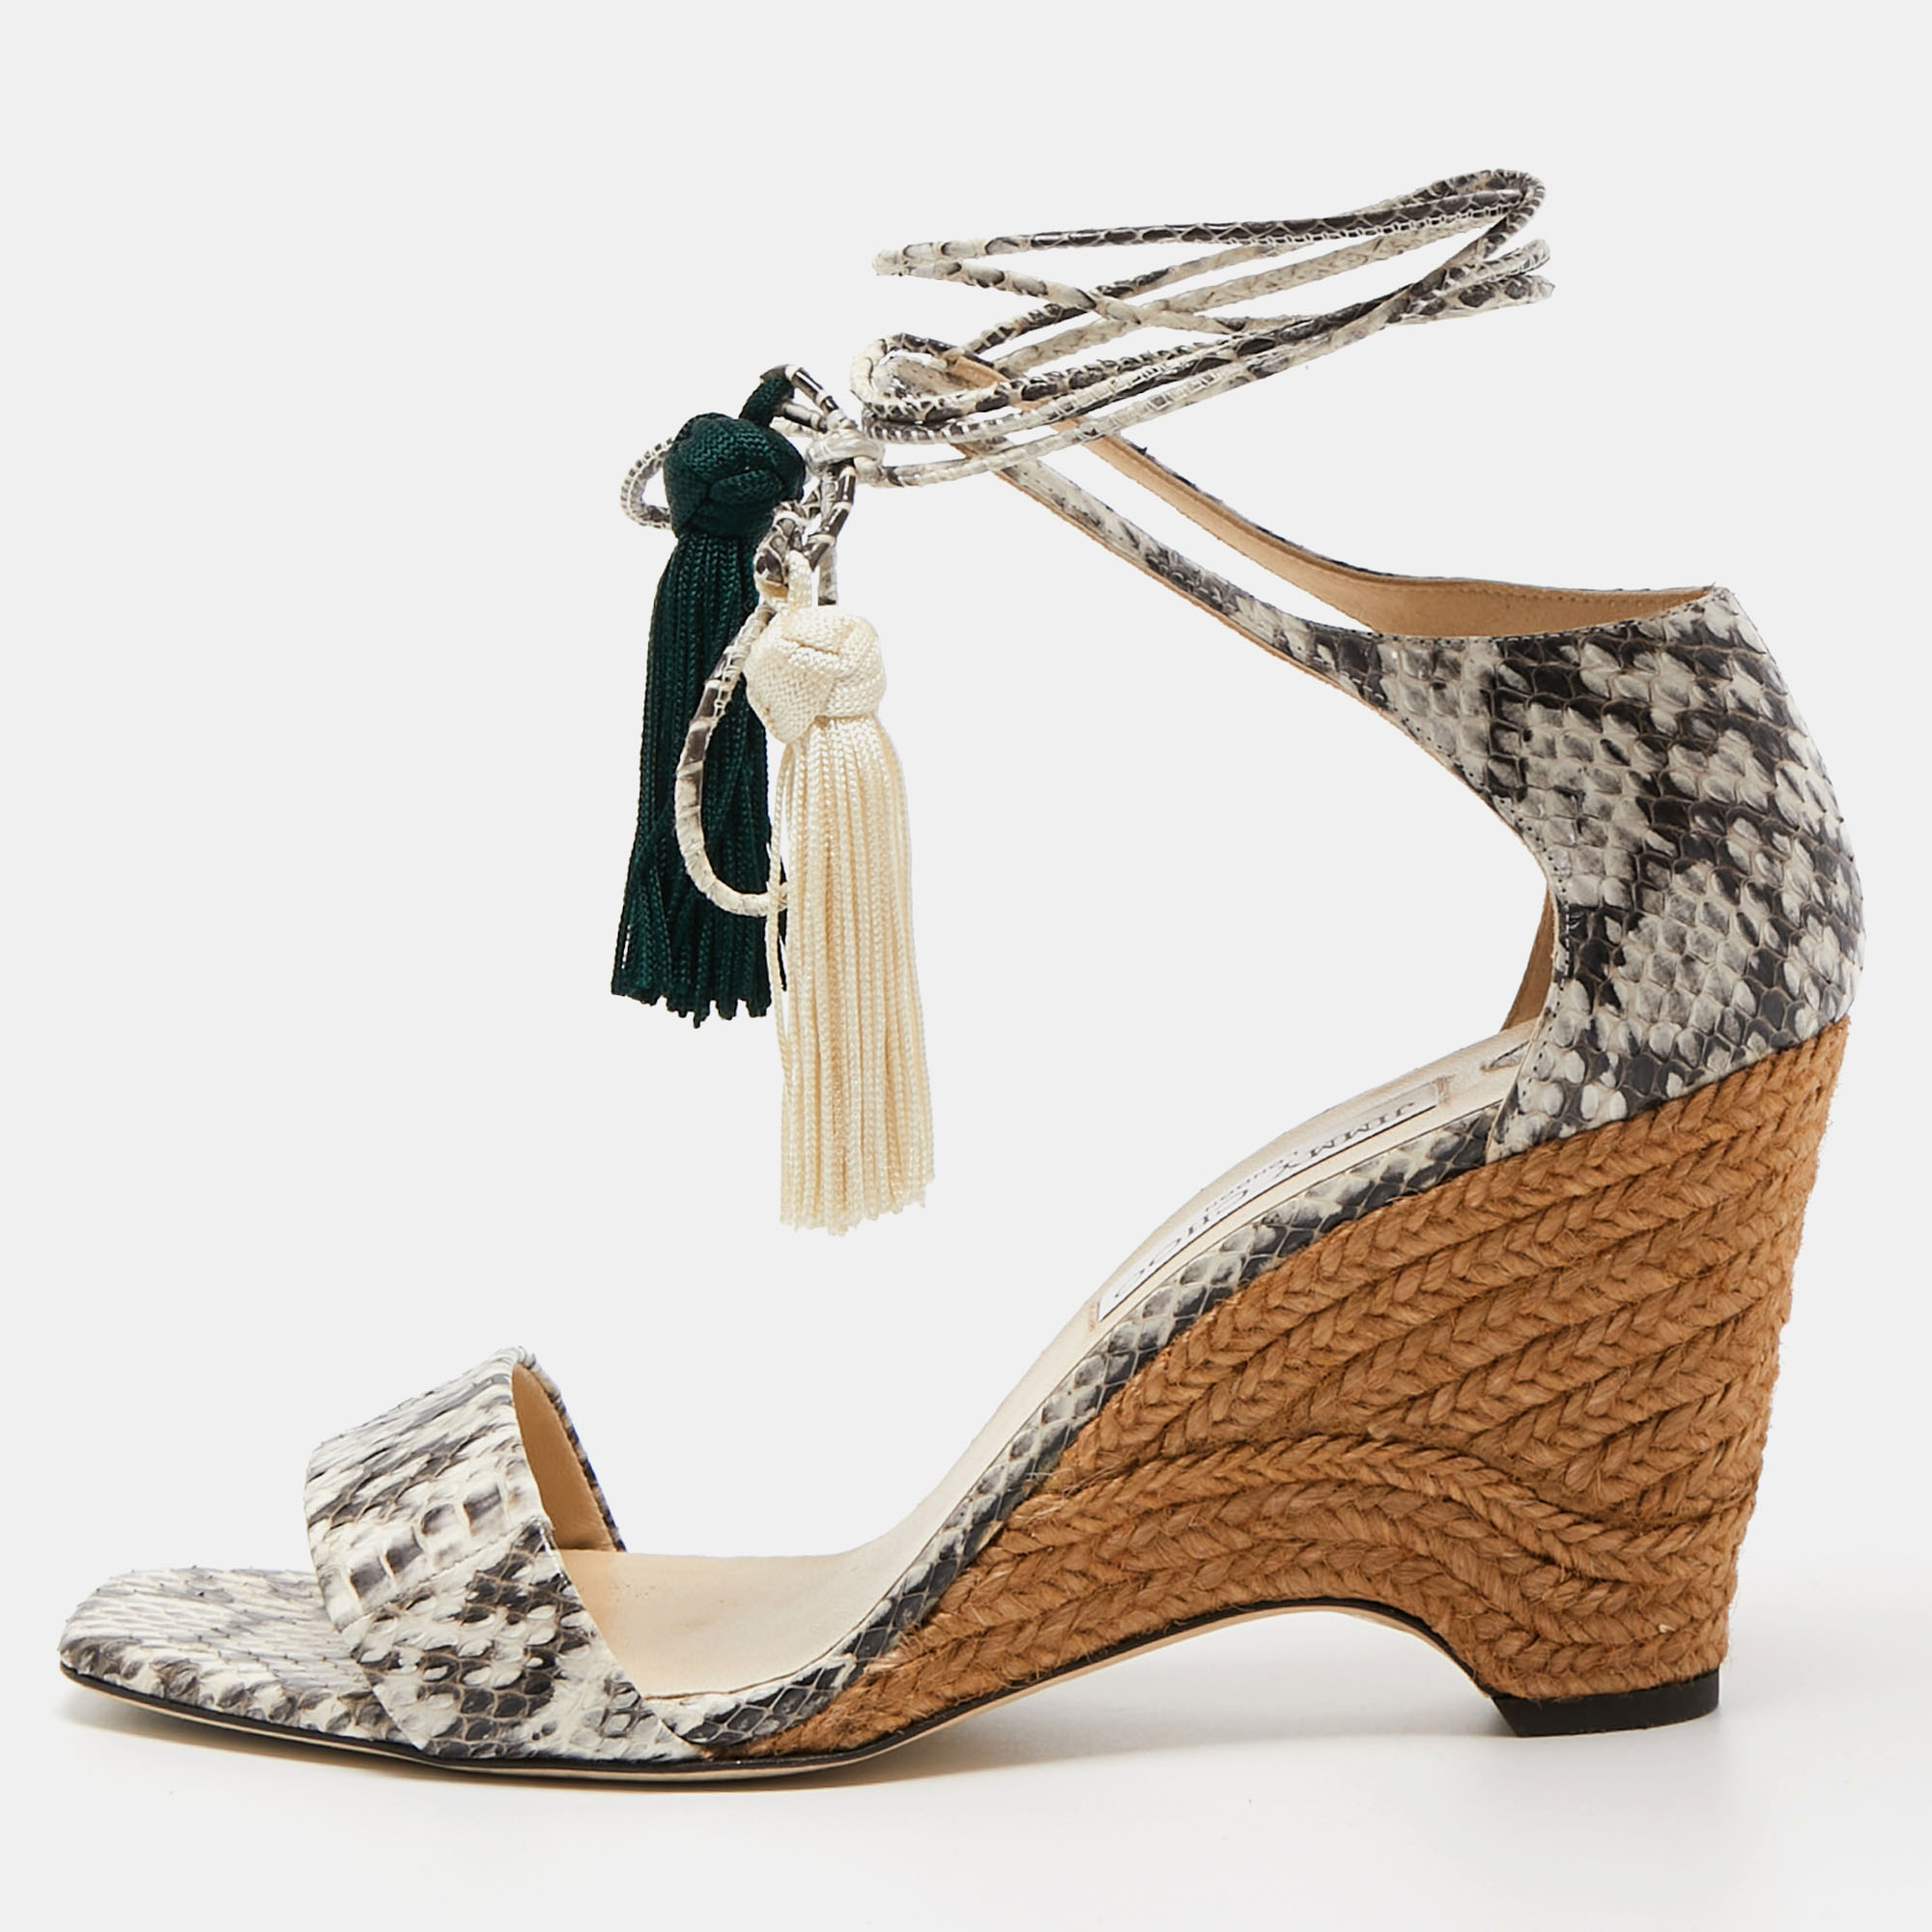 Jimmy choo brown/cream python leather wedge sandals size 40.5